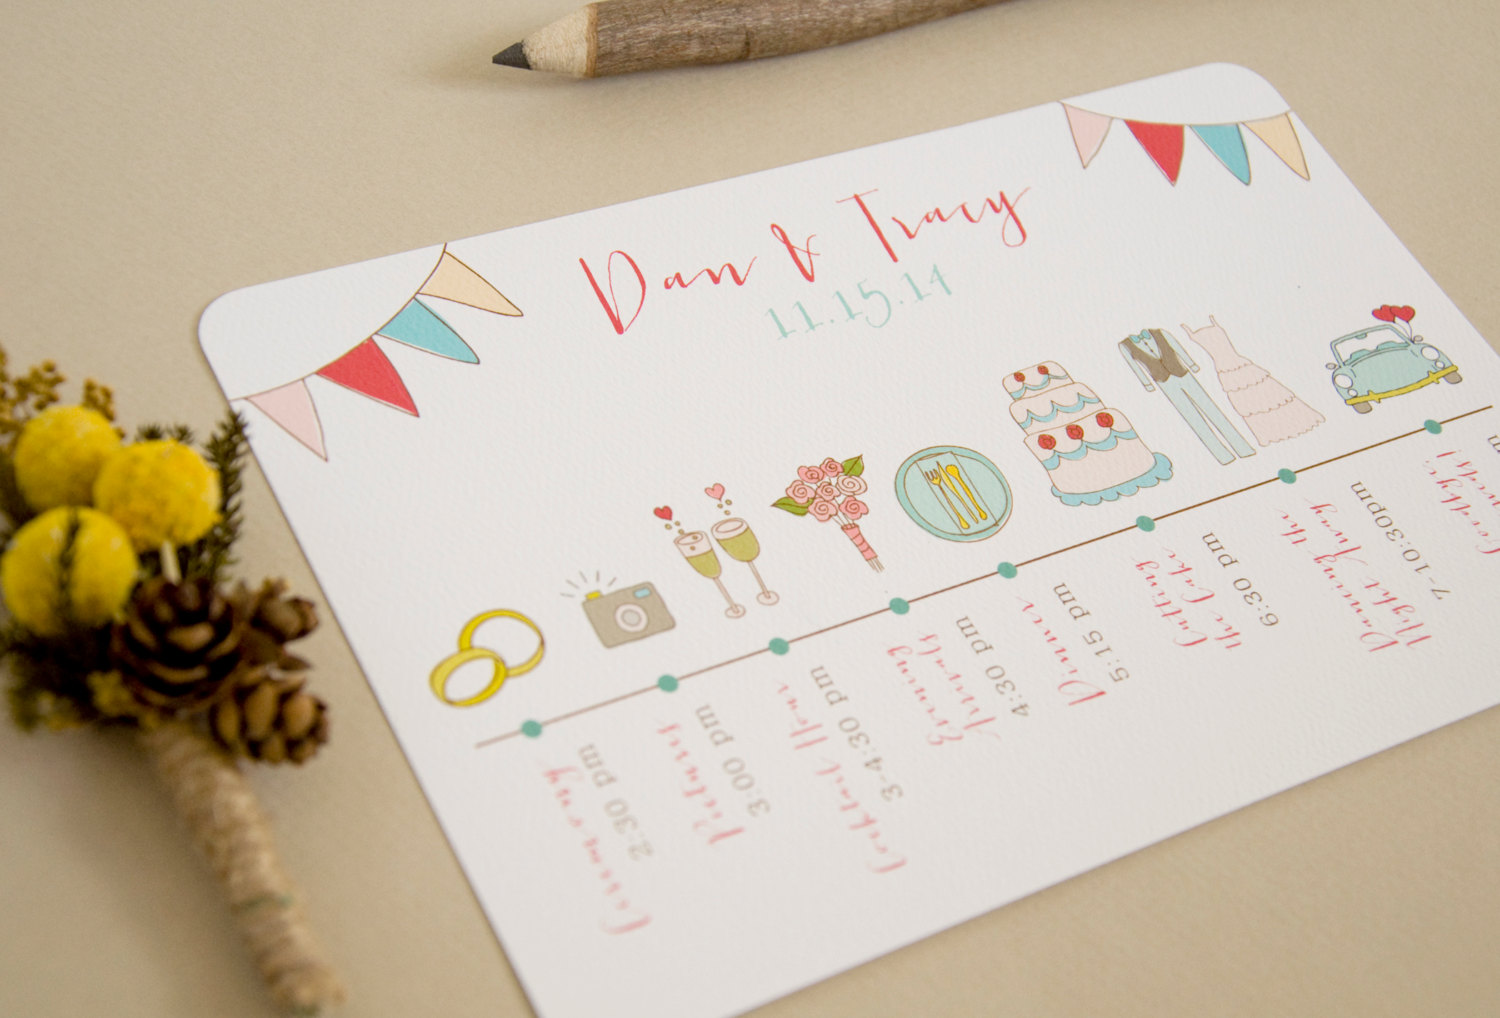 Wedding Itinerary | via http://emmalinebride.com/planning/tips-to-be-on-time/